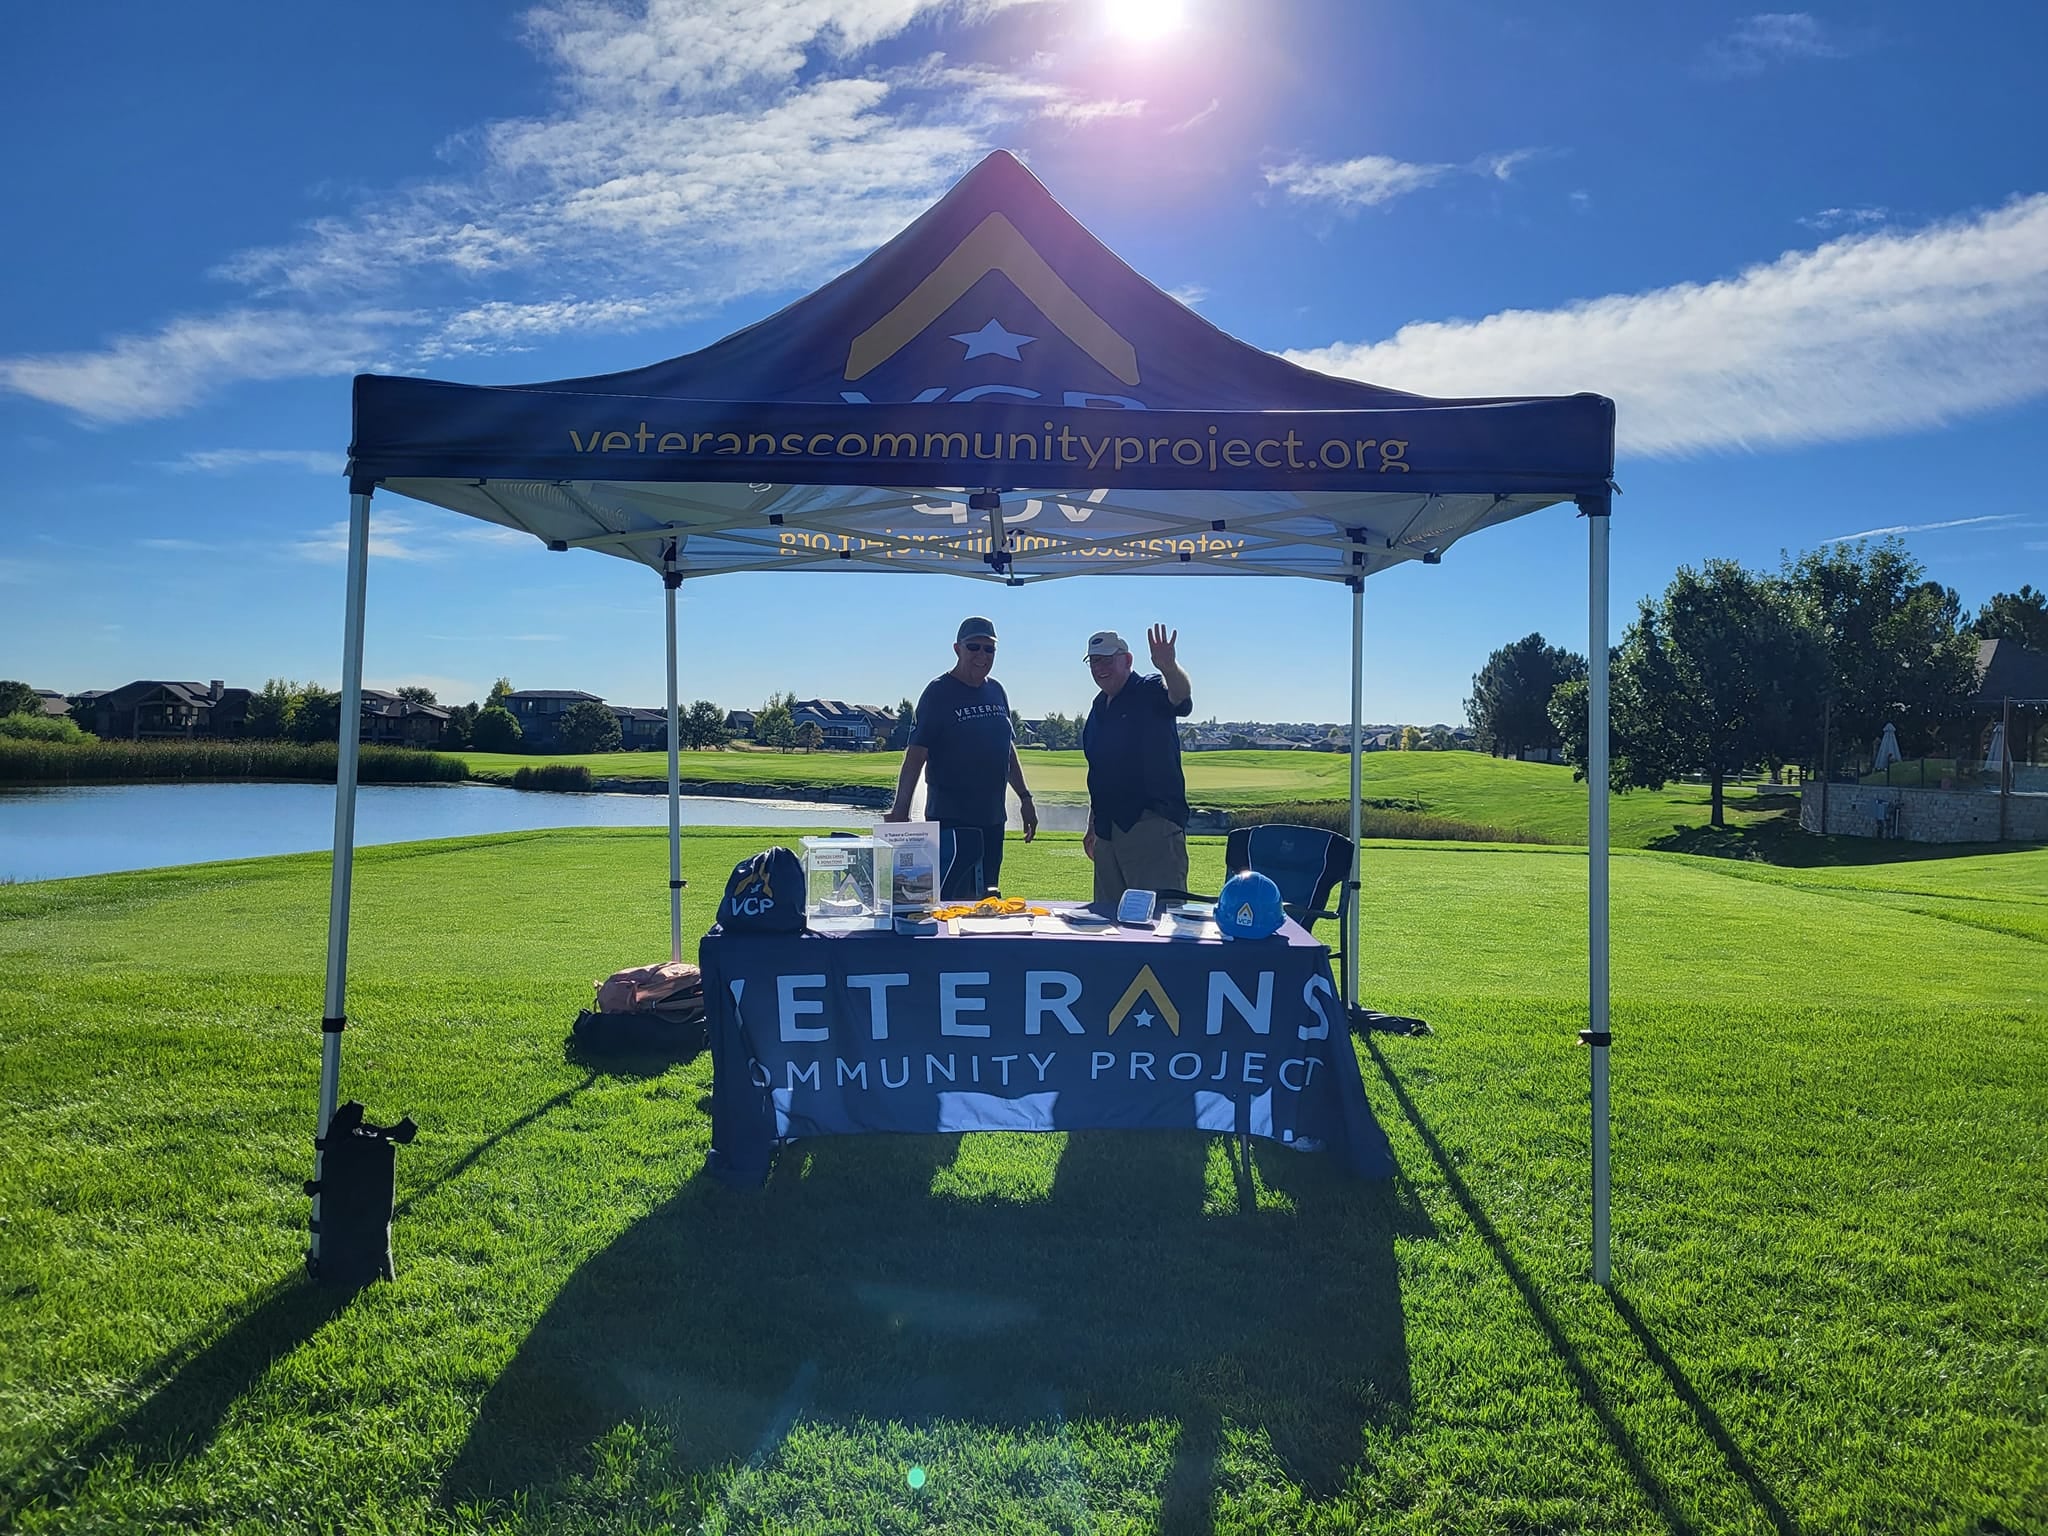 Landmark Homes 6th Annual Golf Tournament: Together, We Raised 2,500 for the Veteran's Community Project